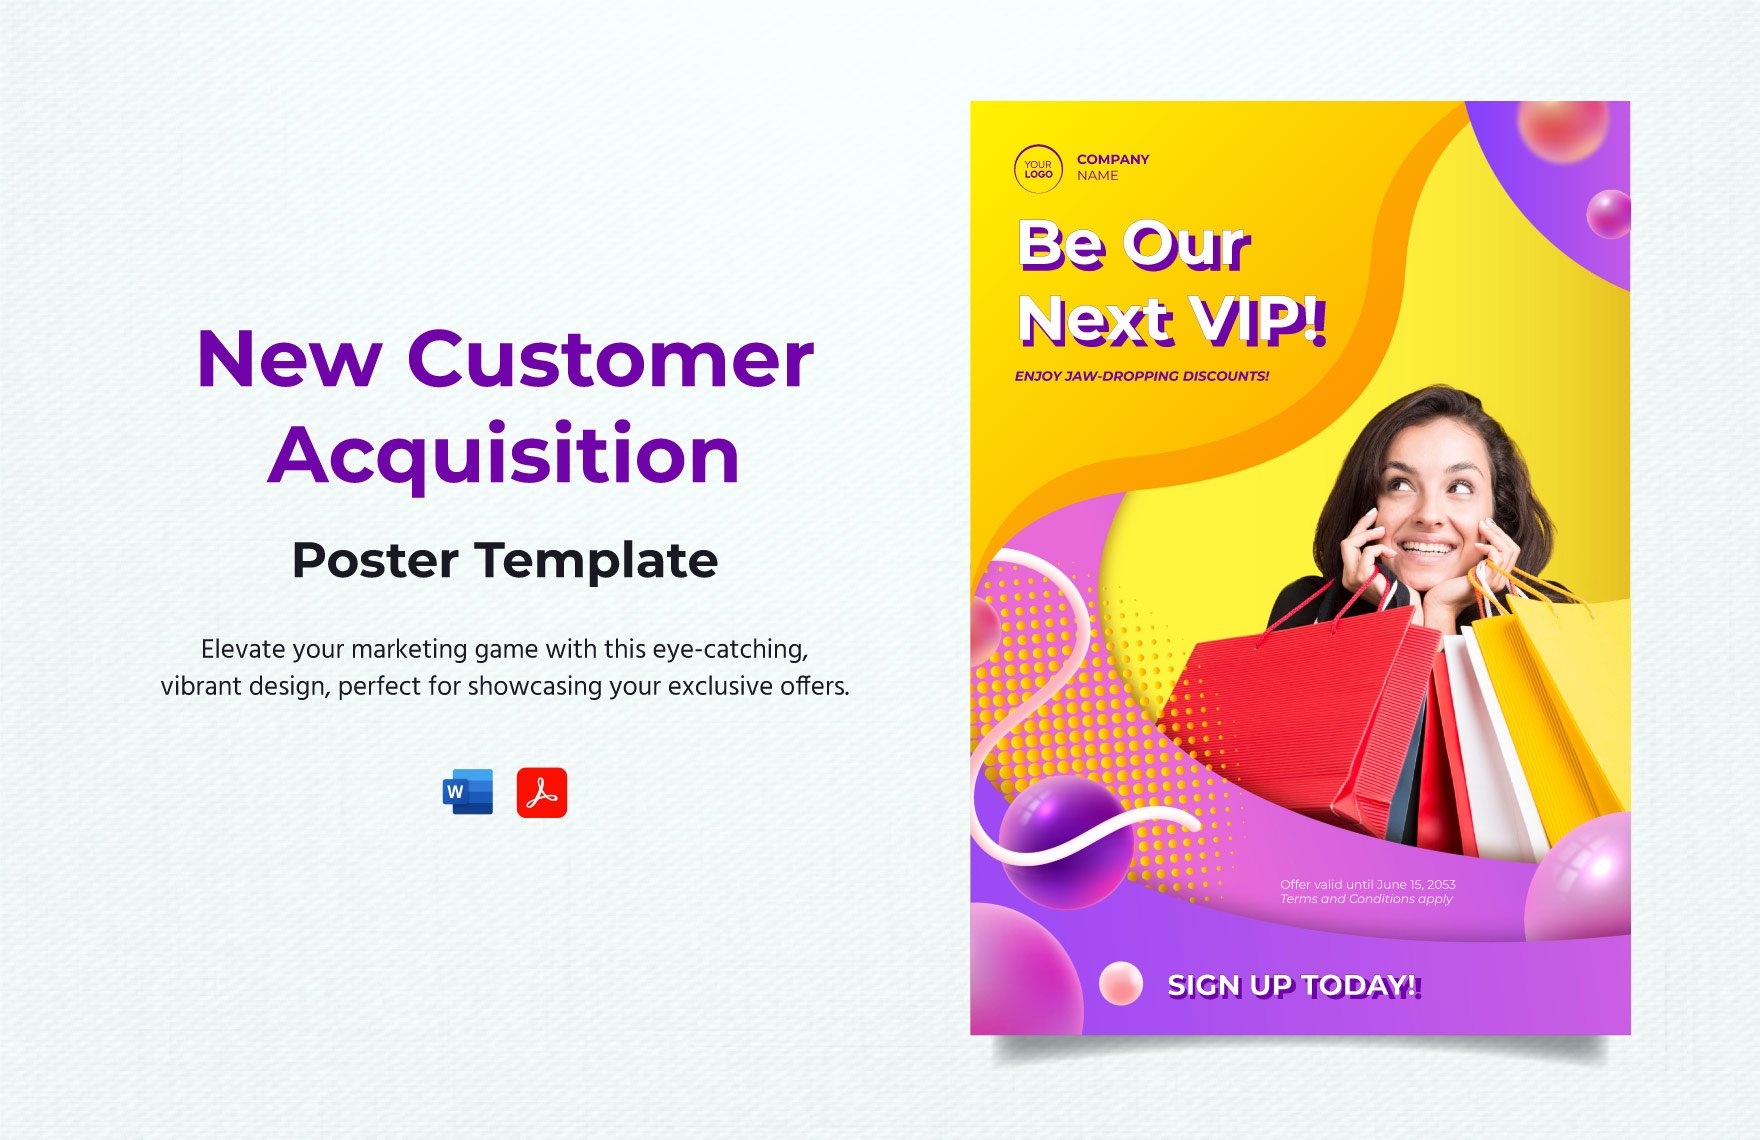 New Customer Acquisition Poster Template